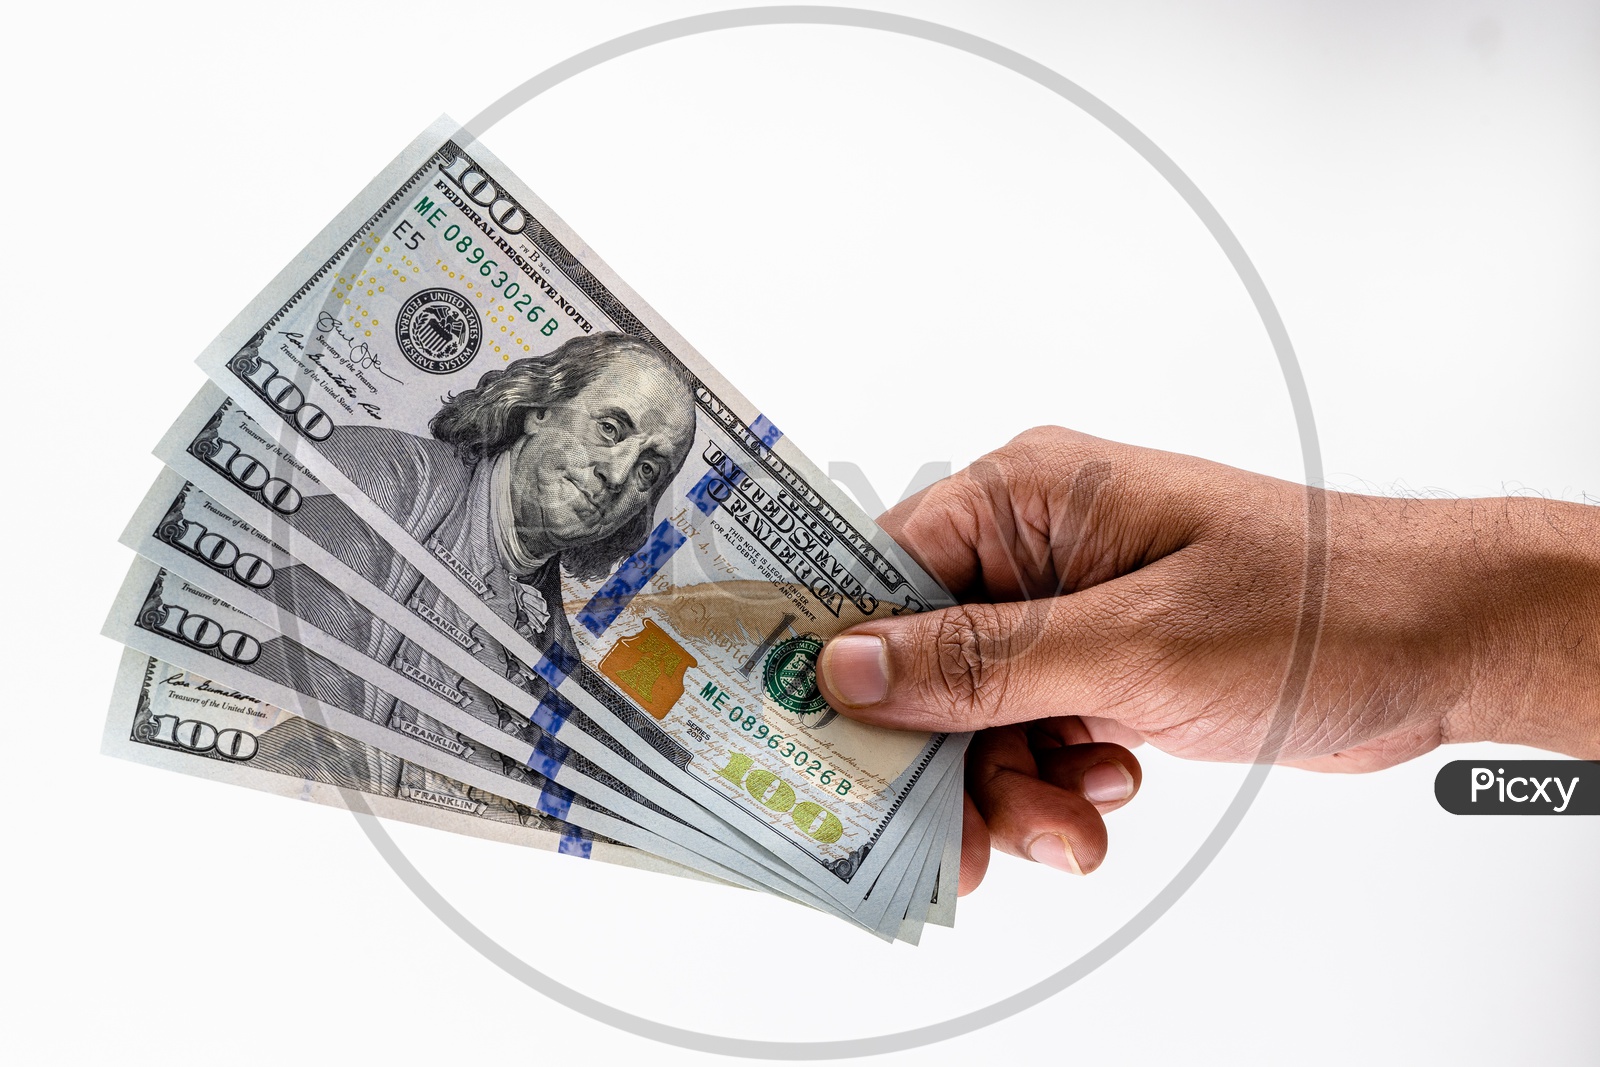 A Man Holding US Hundred Dollar Bills  or Currency  in Hand On an Isolated White Background